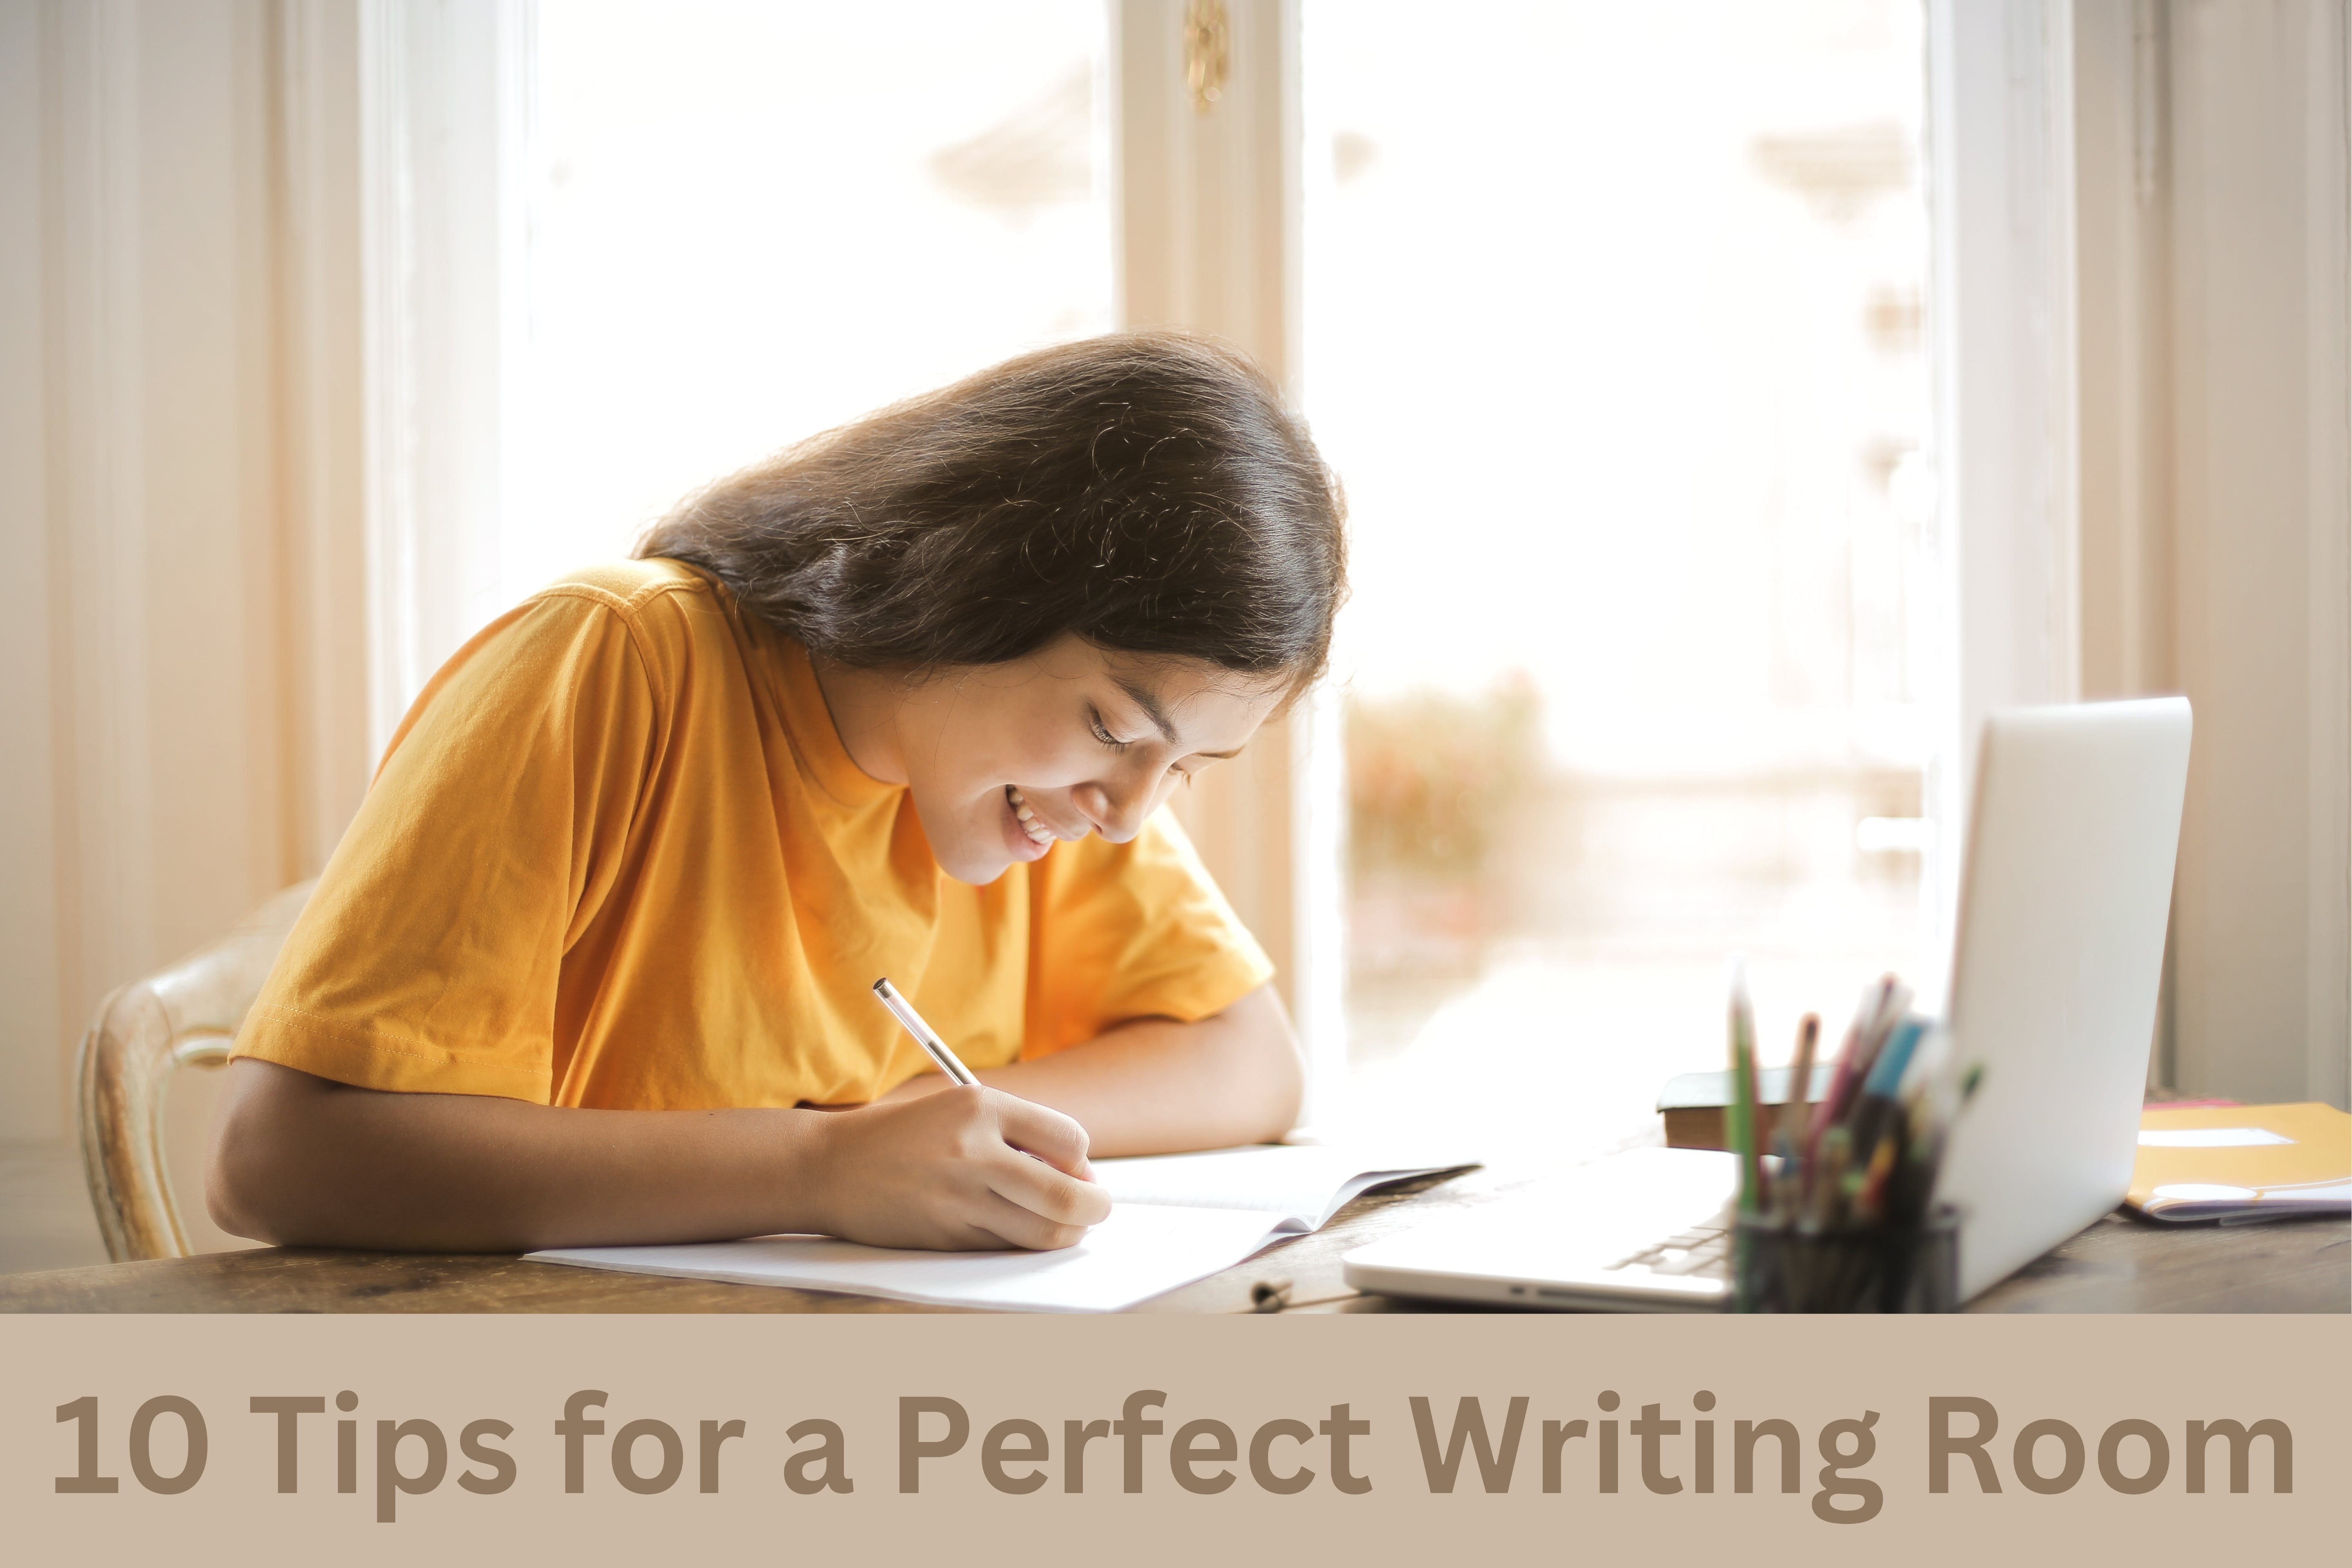 Transform Your Writing Space: 10 Tips for Creating the Ideal Writing Room